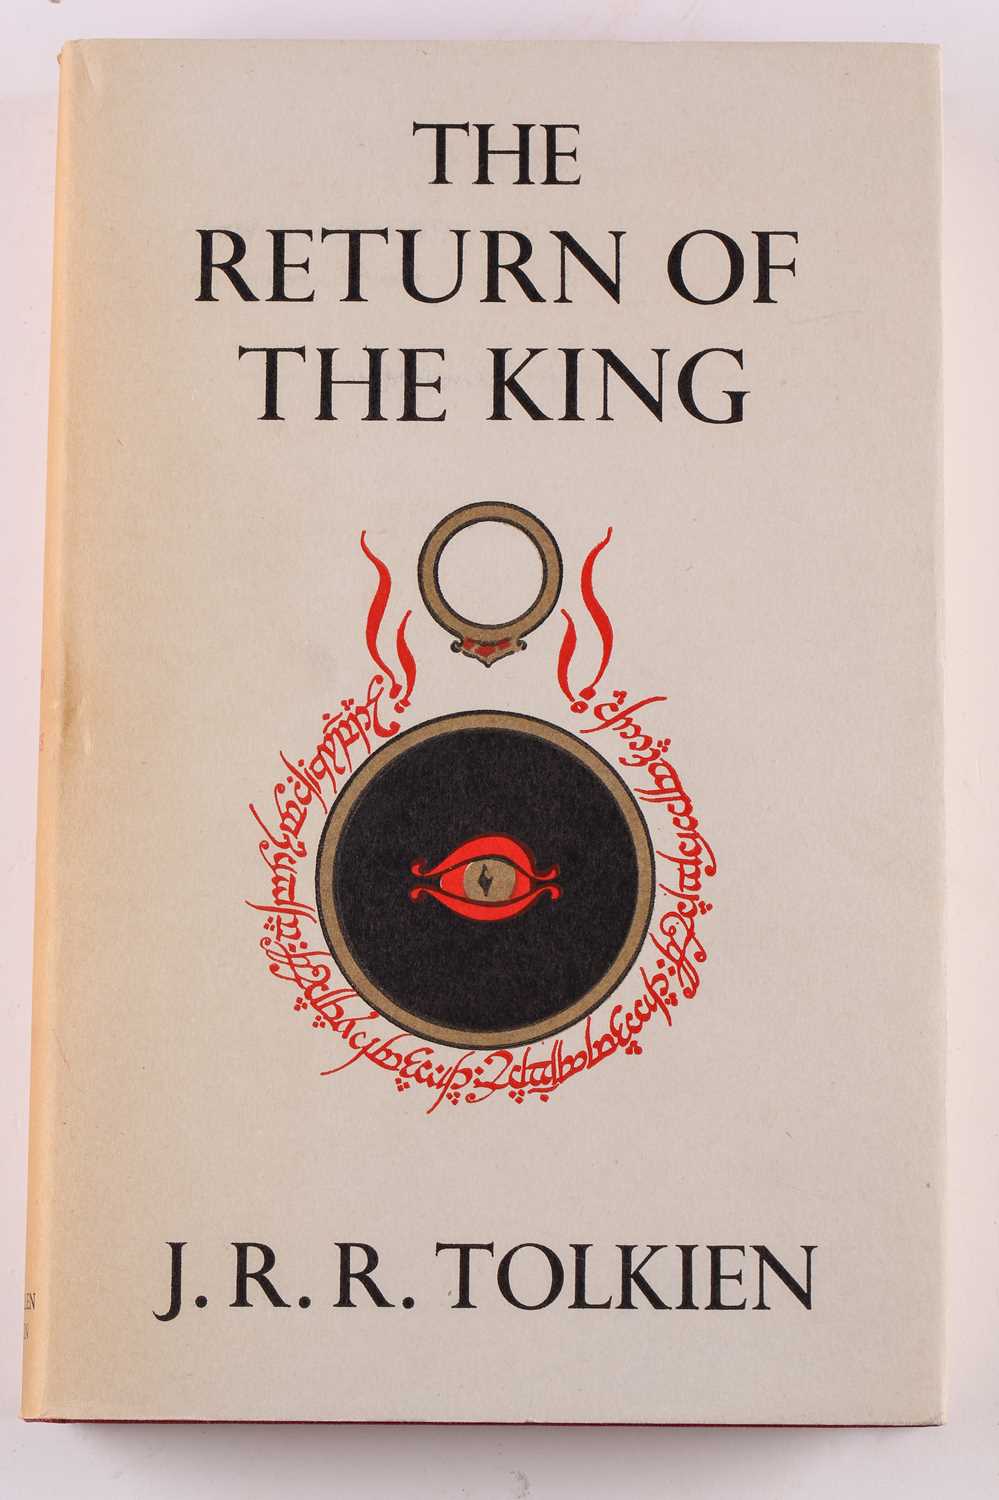 Tolkien (J.R.R.) The Lord of the Rings, 3 volumes in a slip case, George Allen & Unwin Ltd, 'The - Image 3 of 17